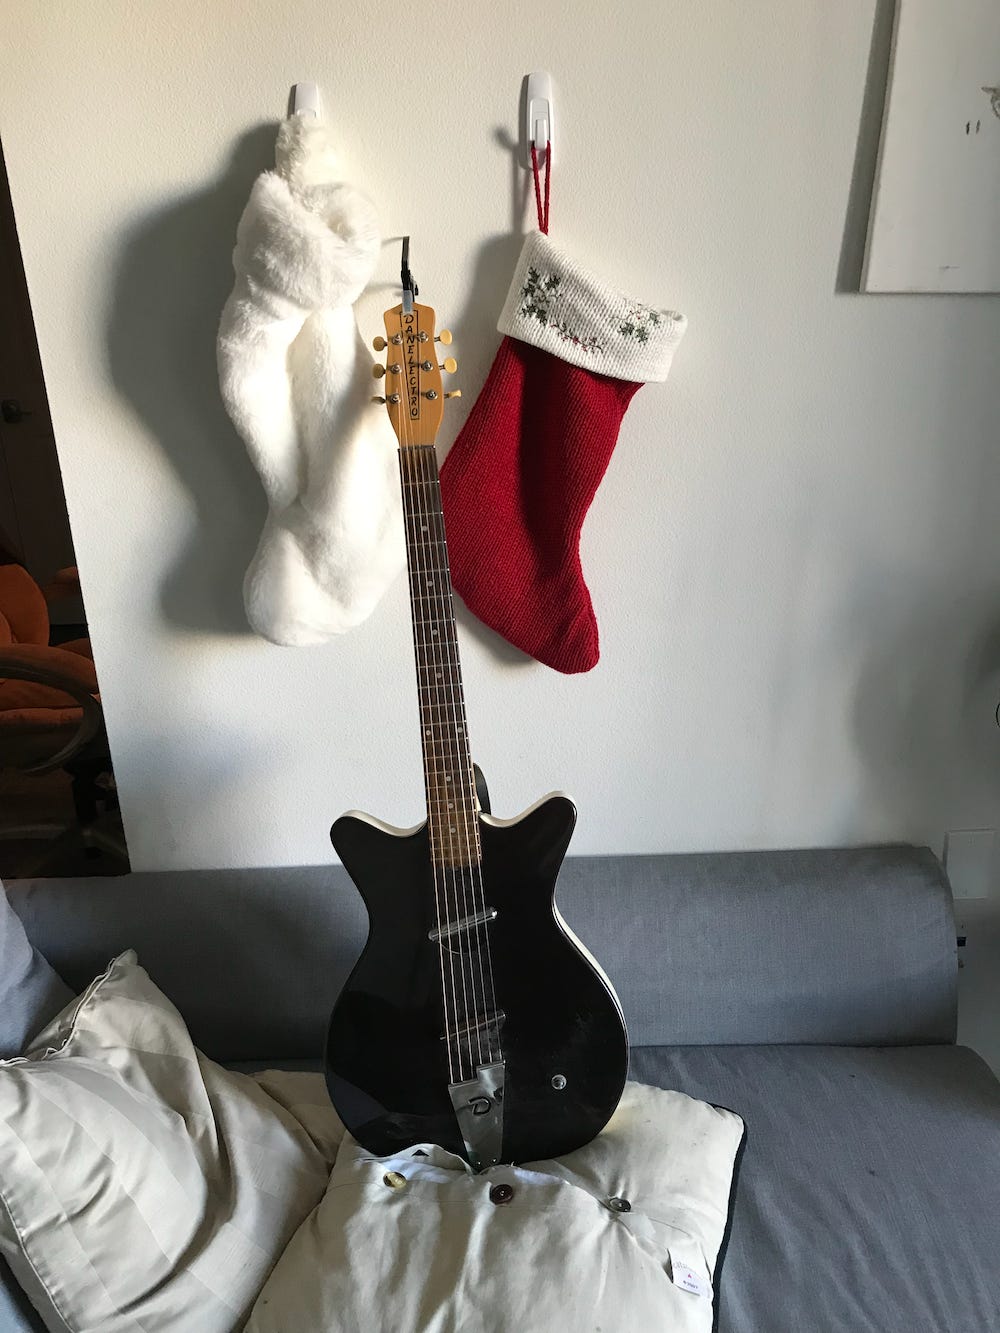 picture of the guitar used for the recording and xmas stockings.